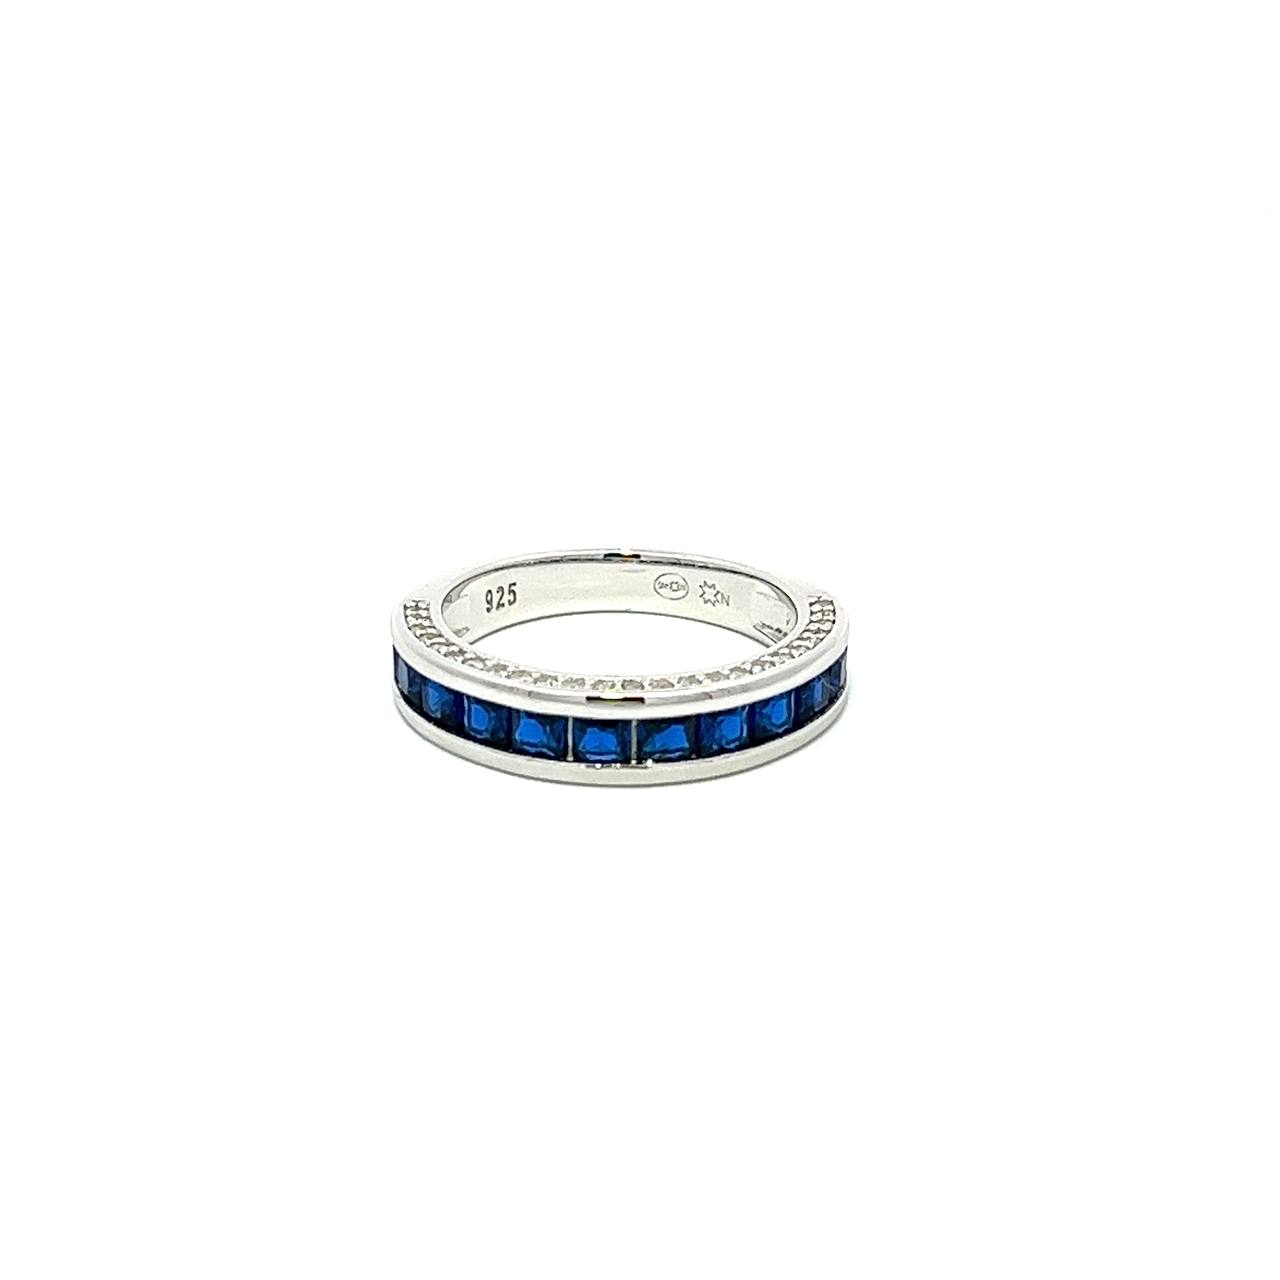 Love and Promise Band Silver Ring by Fall in Love